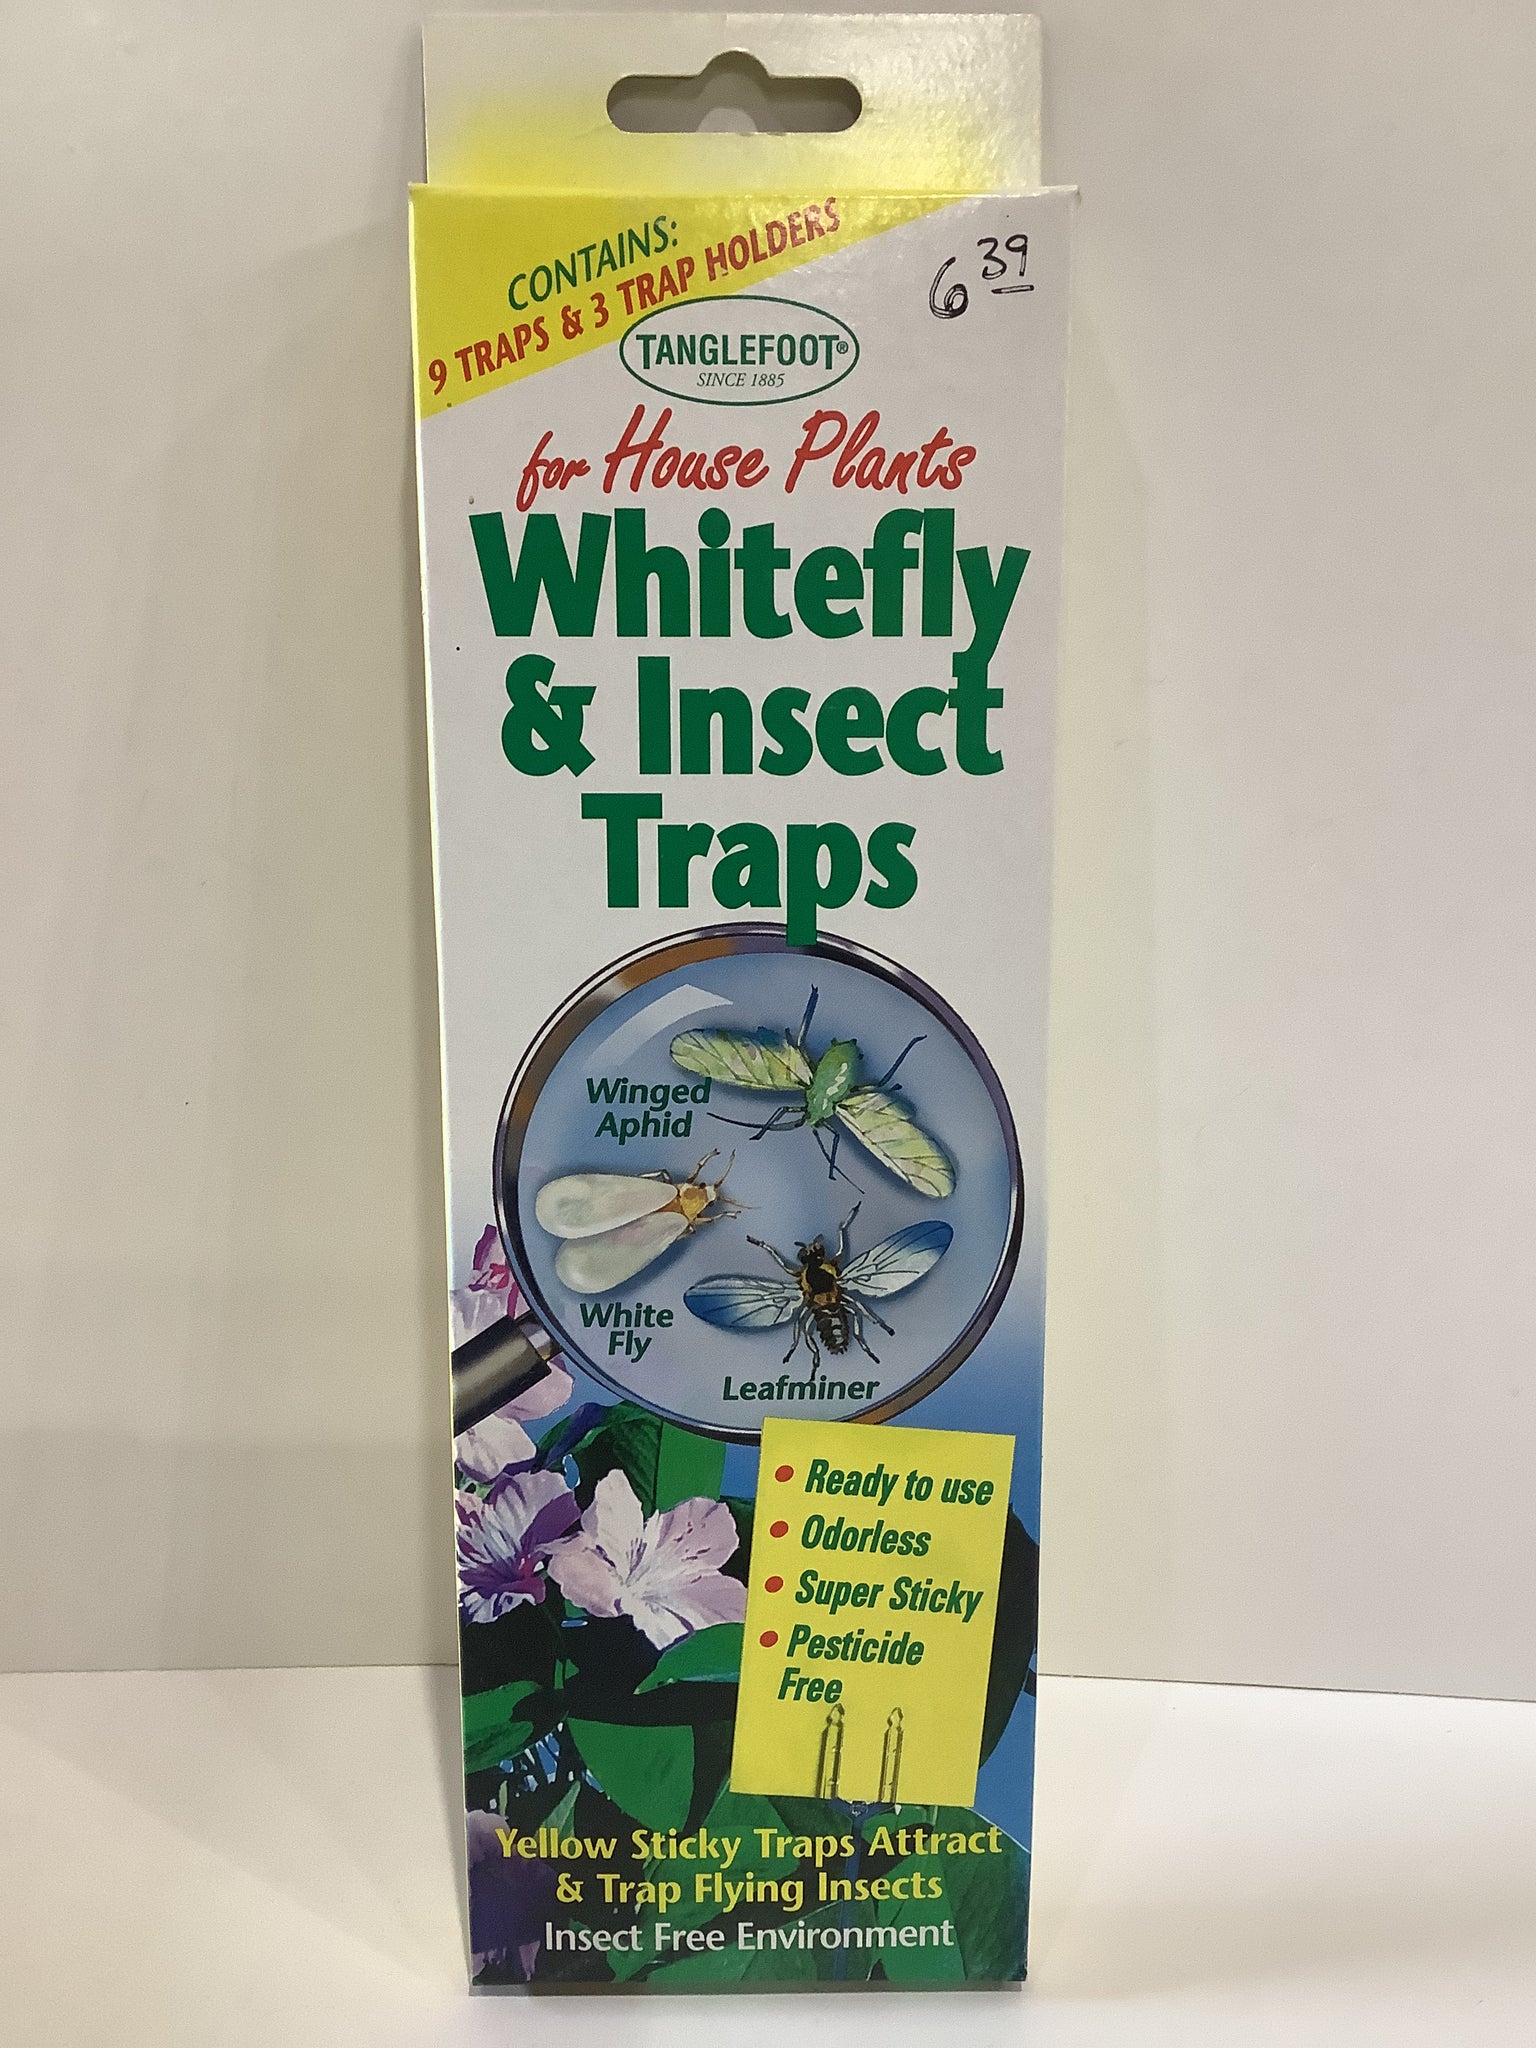 Whitefly & Insect traps